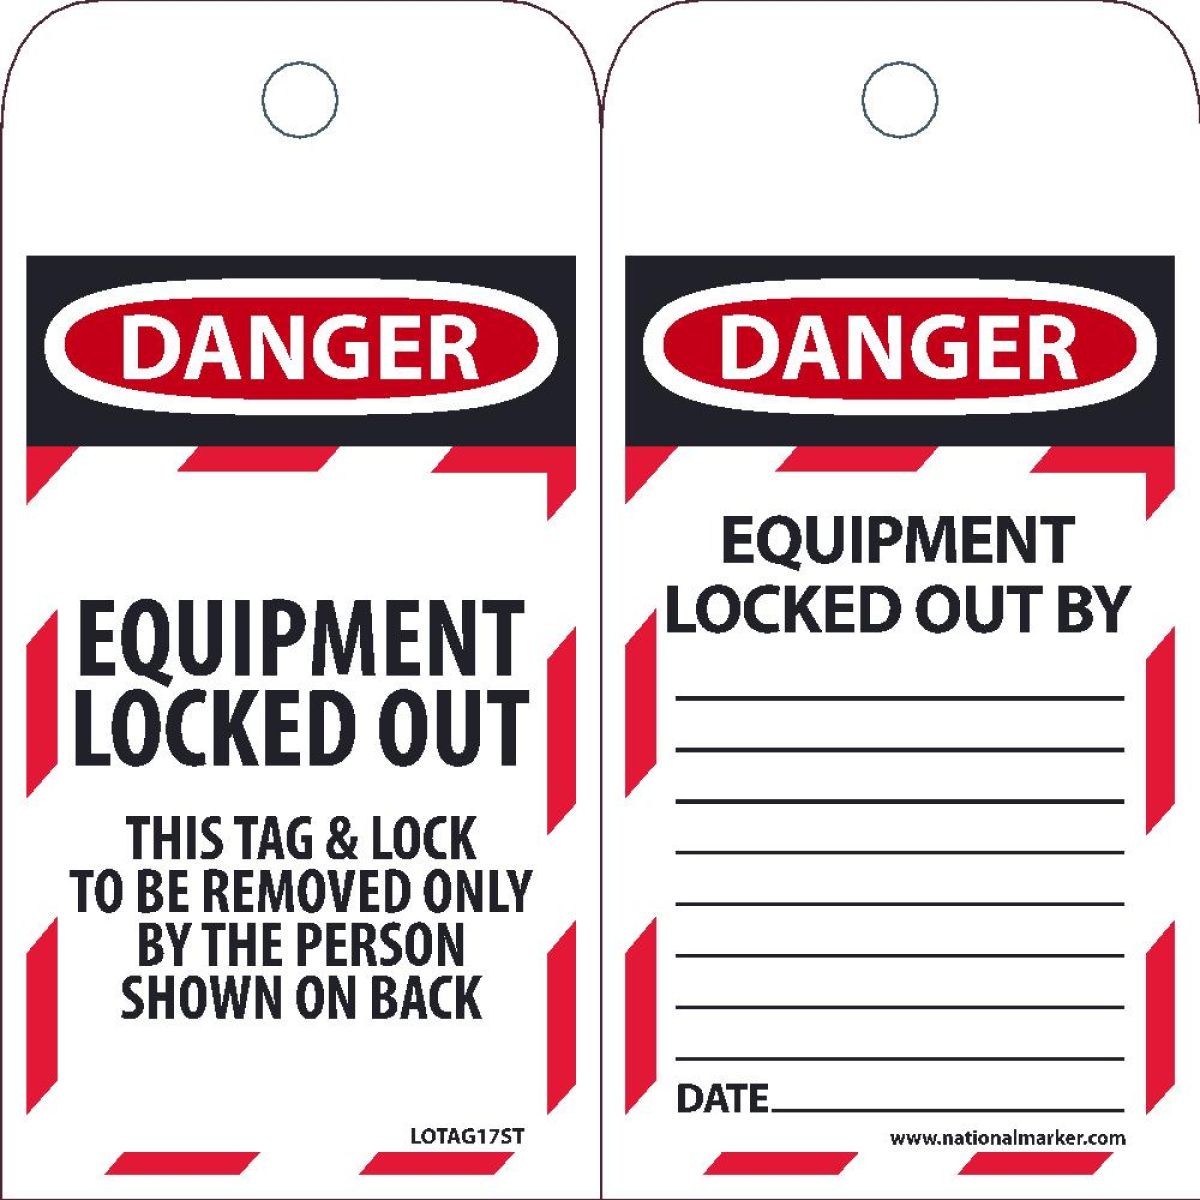 DANGER EQUIPMENT LOCKED OUT TAG